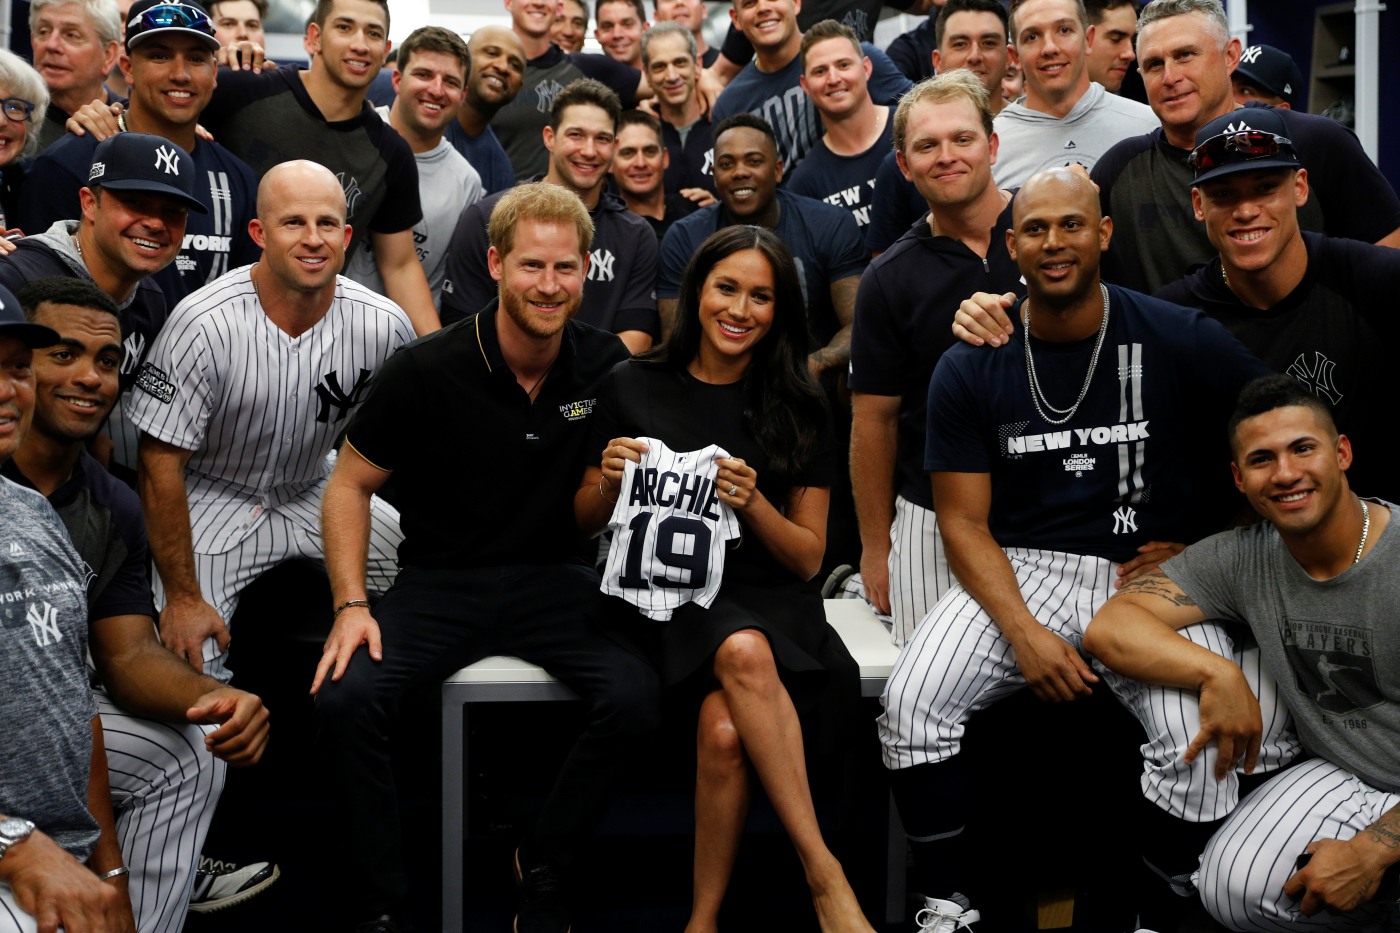 Britain's Prince Harry and Meghan, Duchess of Sussex attend the Boston Red Sox v New York Yankees match in London